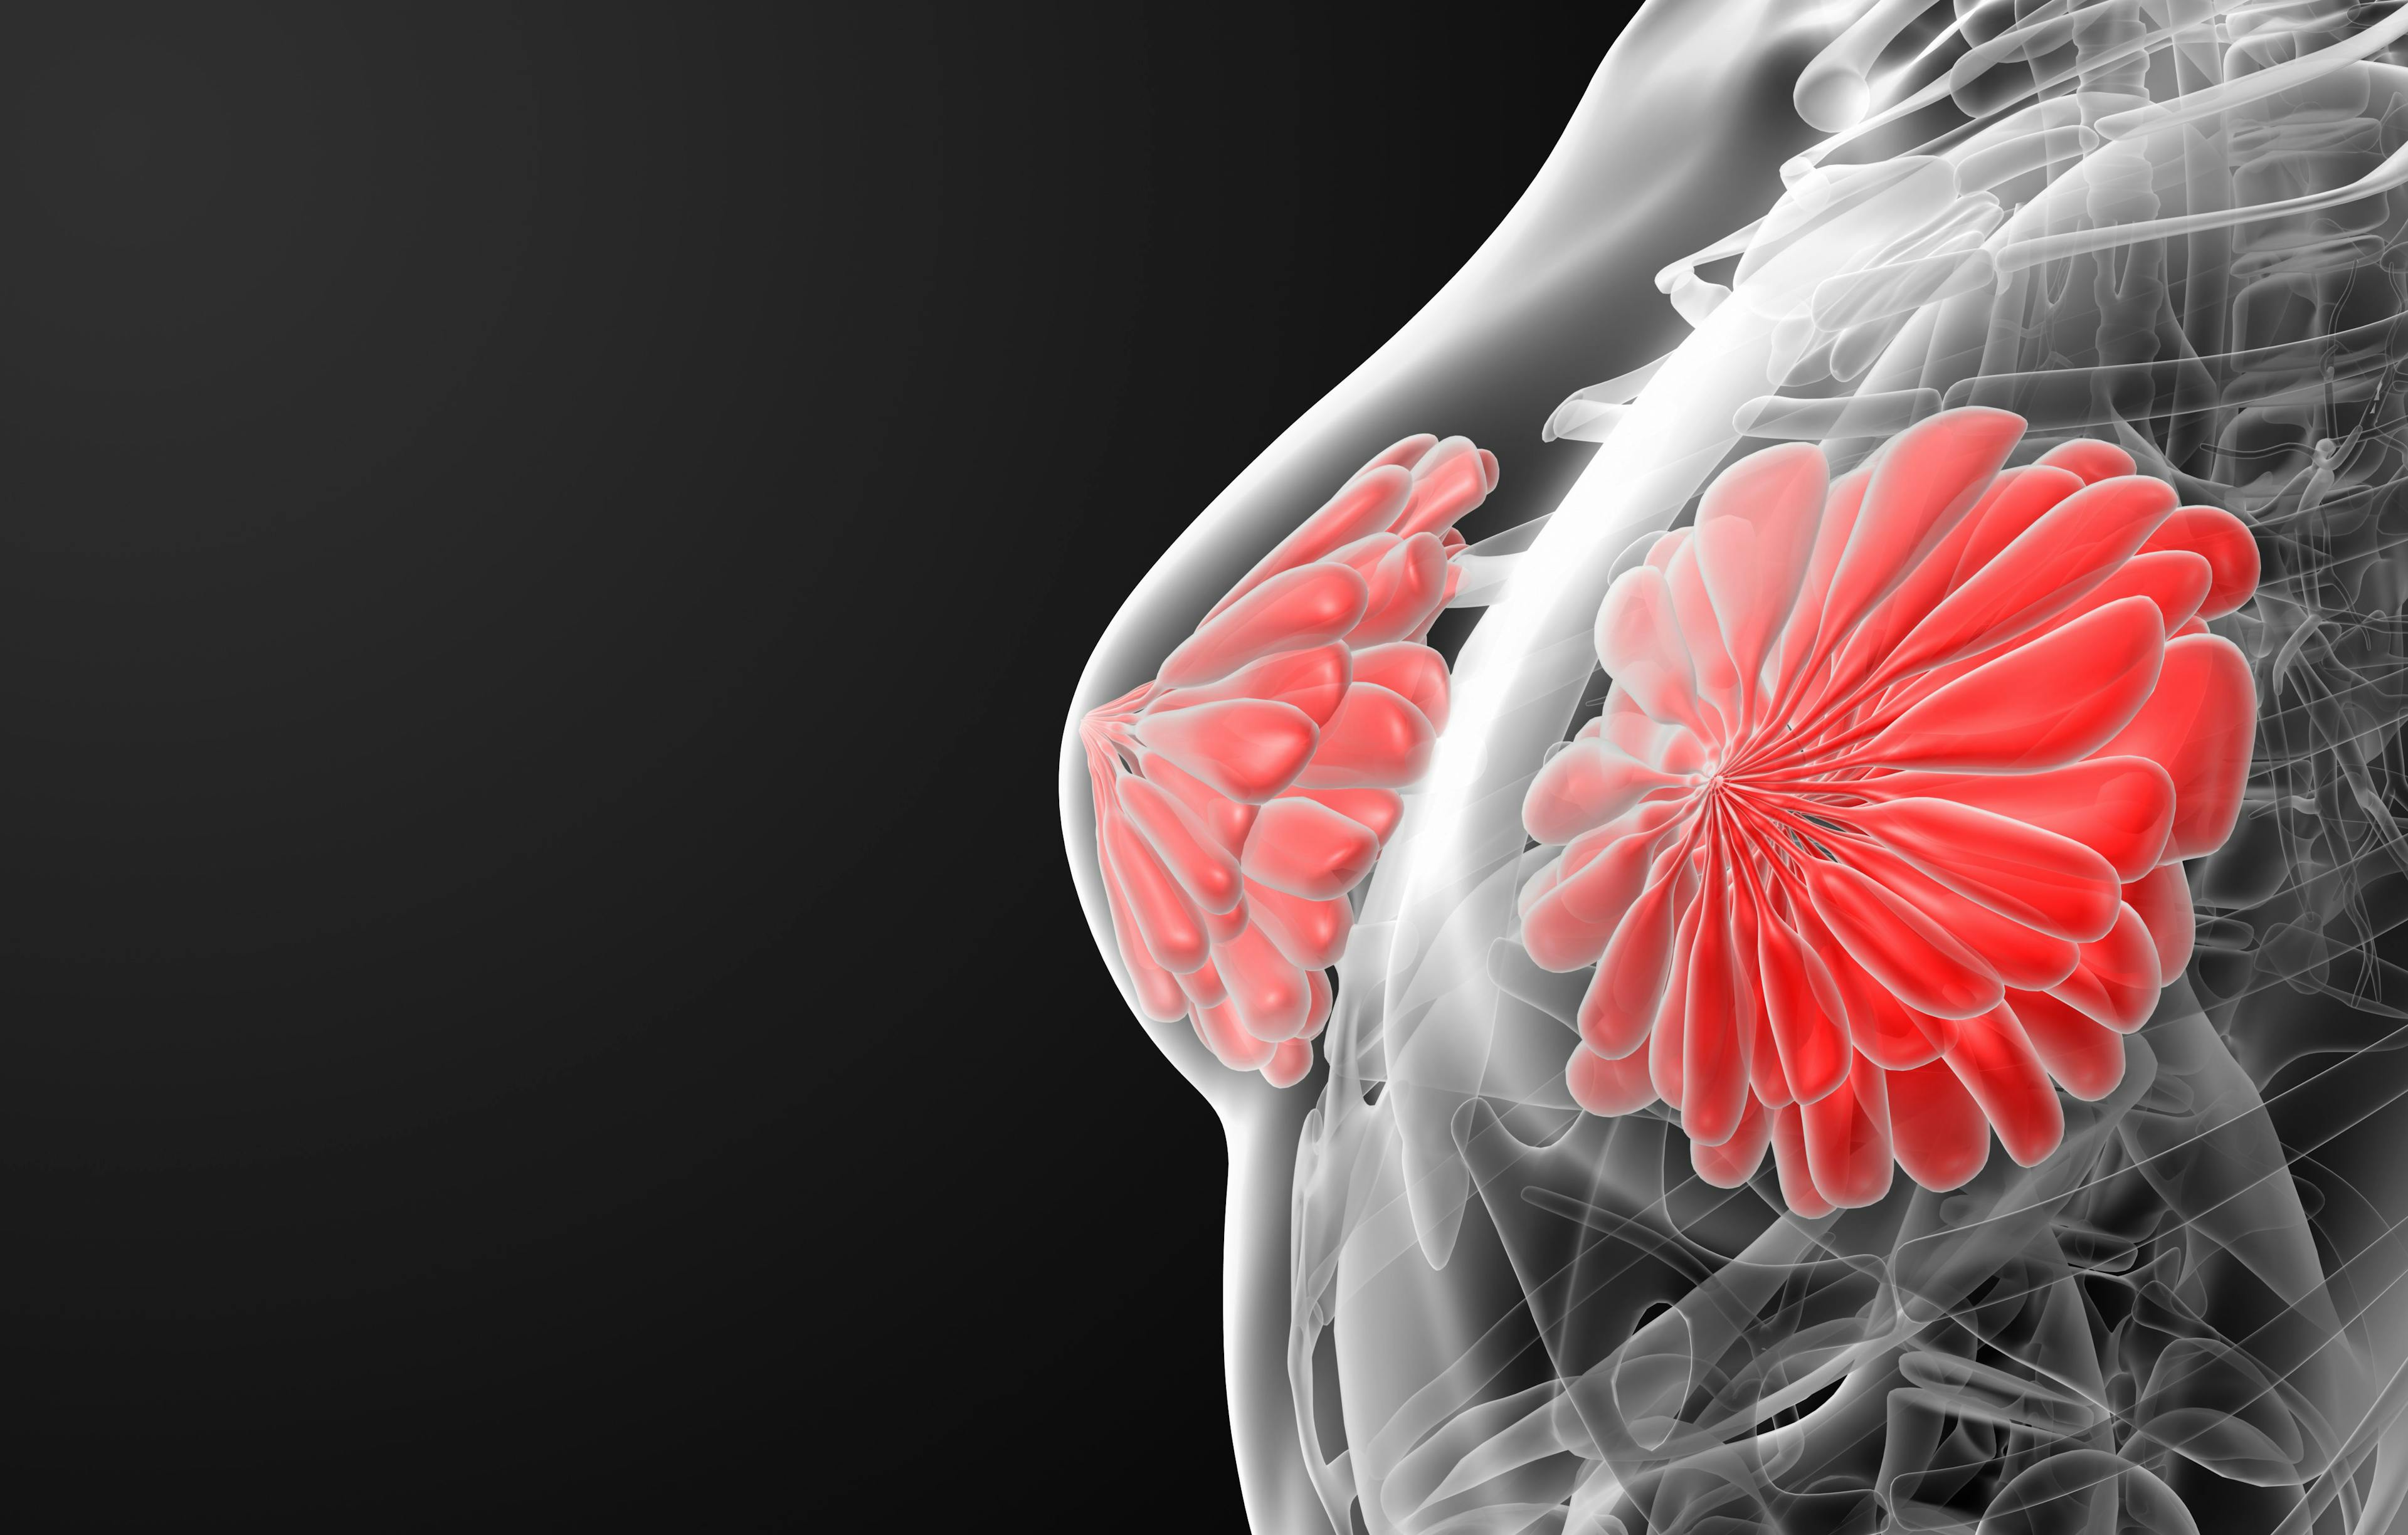 Women with Certain Breast Cancer Risk Factors May Benefit from Mammograms from Age 30-39